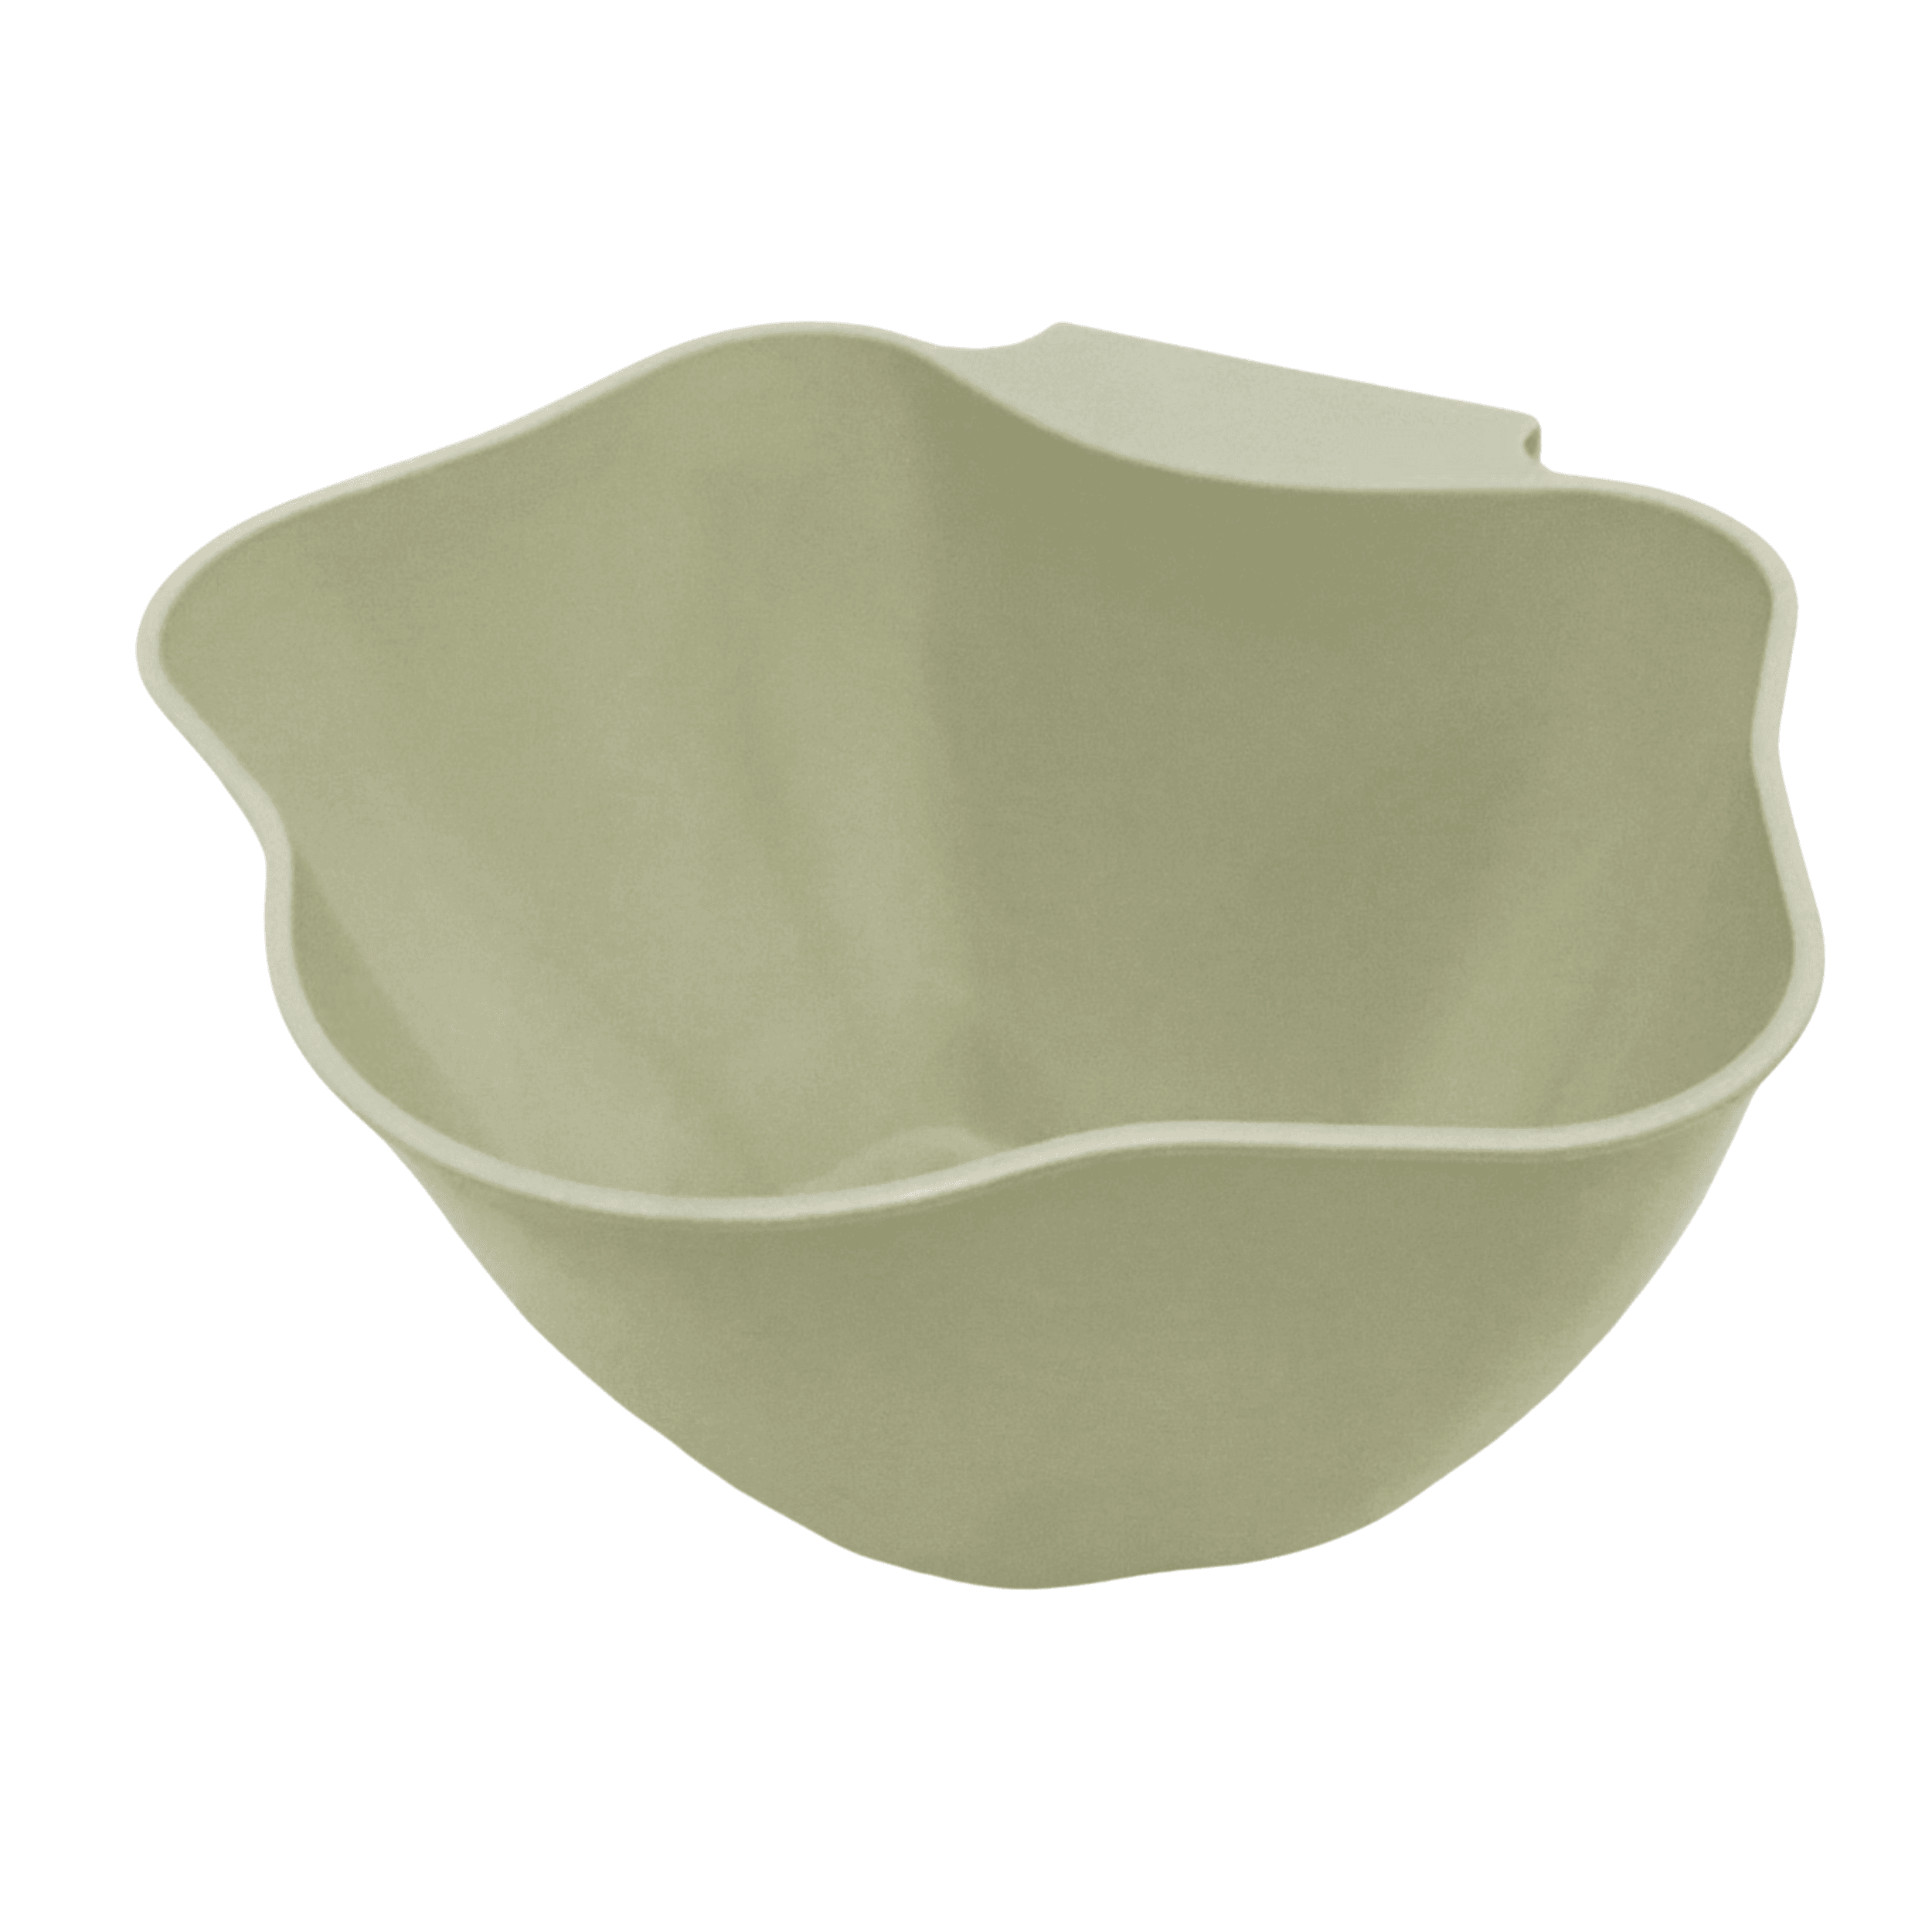 Hanging bowl / basket for the kitchen - green